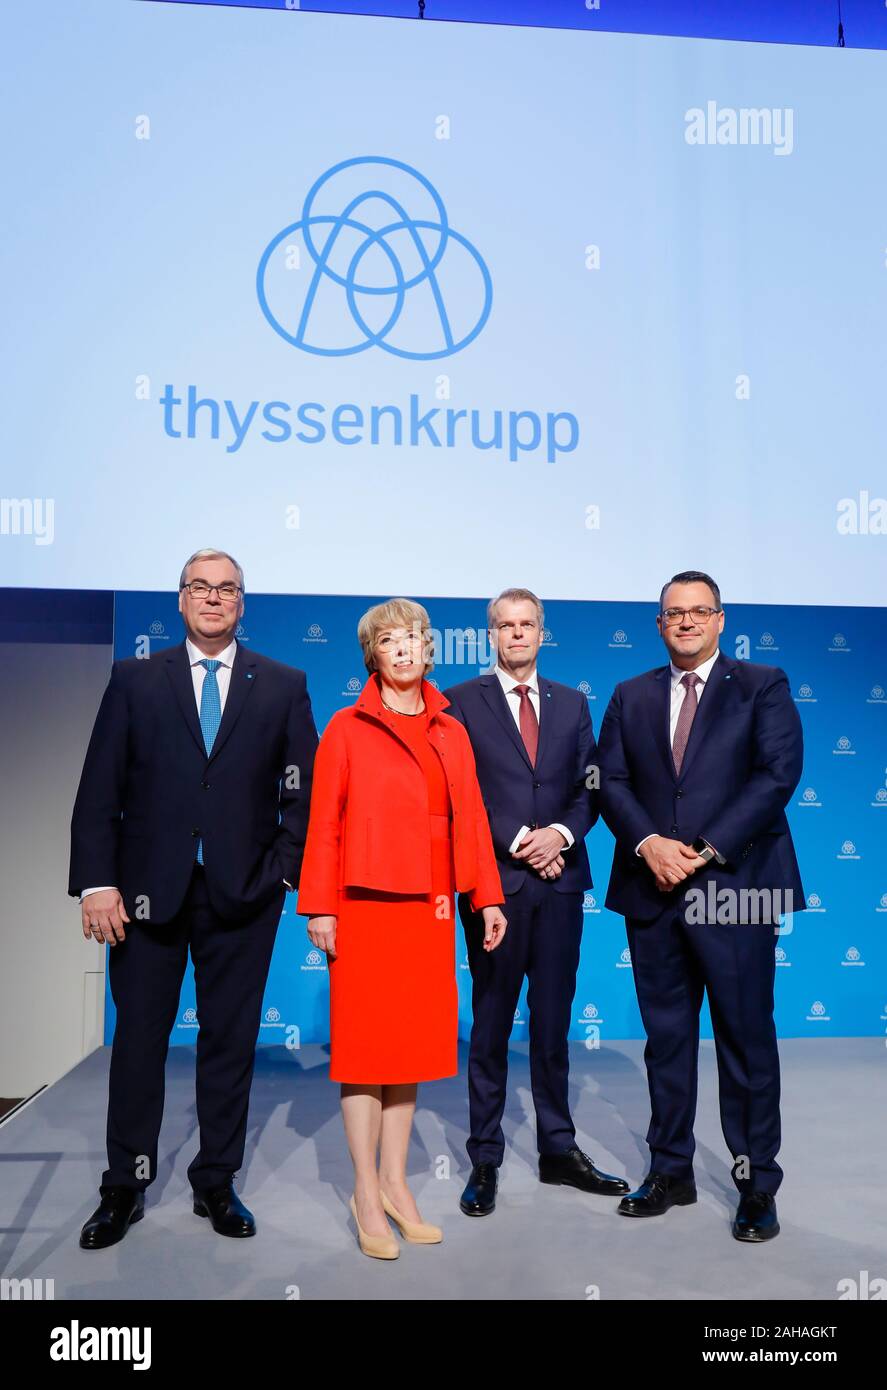 21.11.2019, Essen, North Rhine-Westphalia, Germany - Executive Board of ThyssenKrupp AG, Martina Merz, Chairwoman of the Executive Board, here with Ch Stock Photo